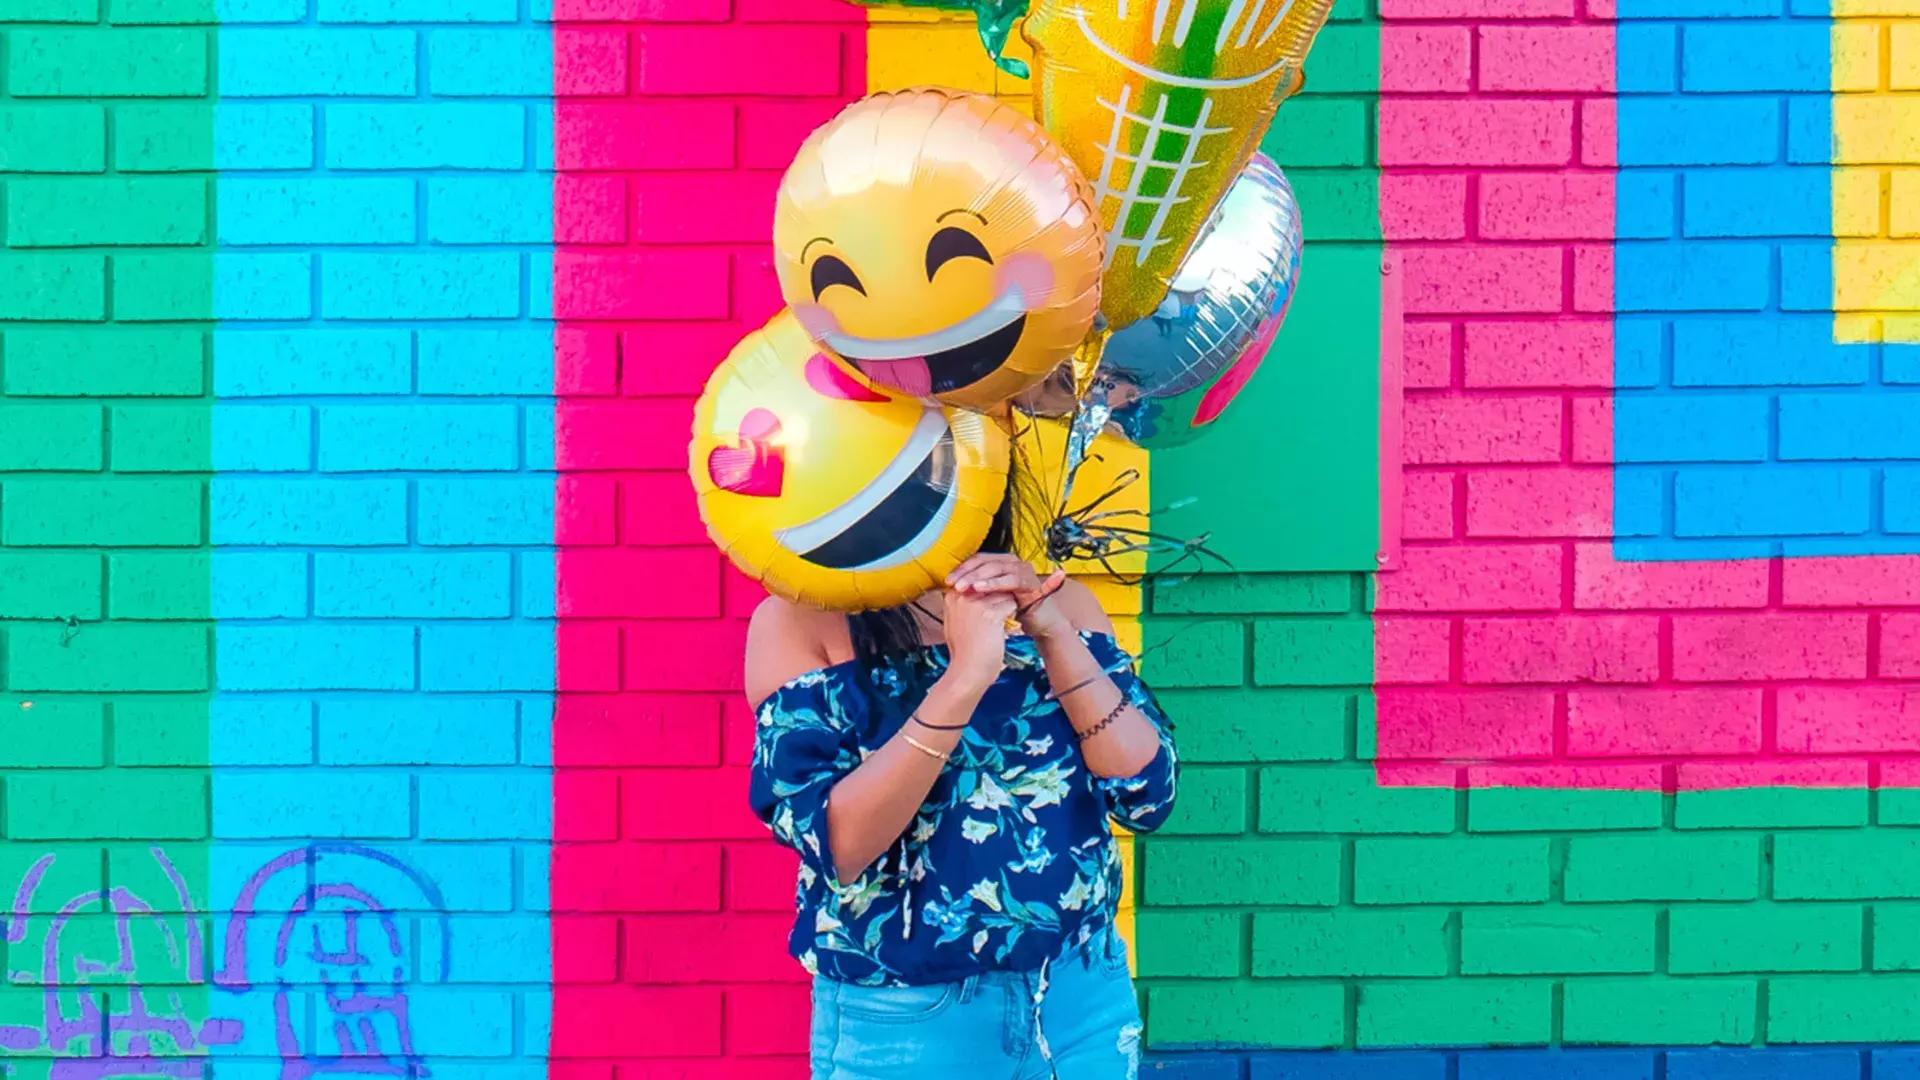 A girl celebrates her birthday with balloons in front of a colorful mural.